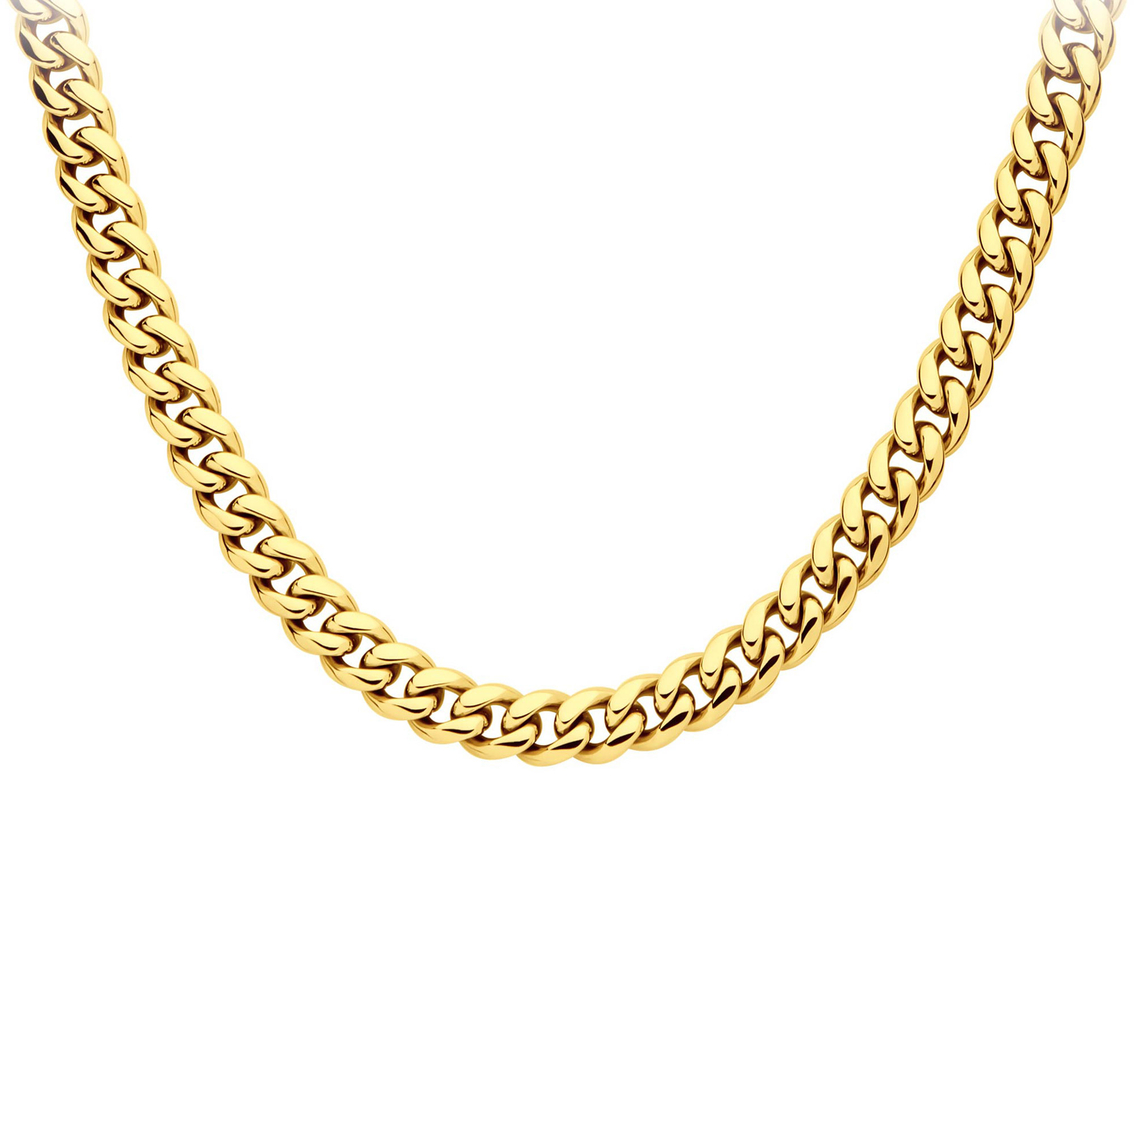 Inox18K Goldtone Miami Cuban Chain Necklace with Cubic Zirconia - Image 2 of 4